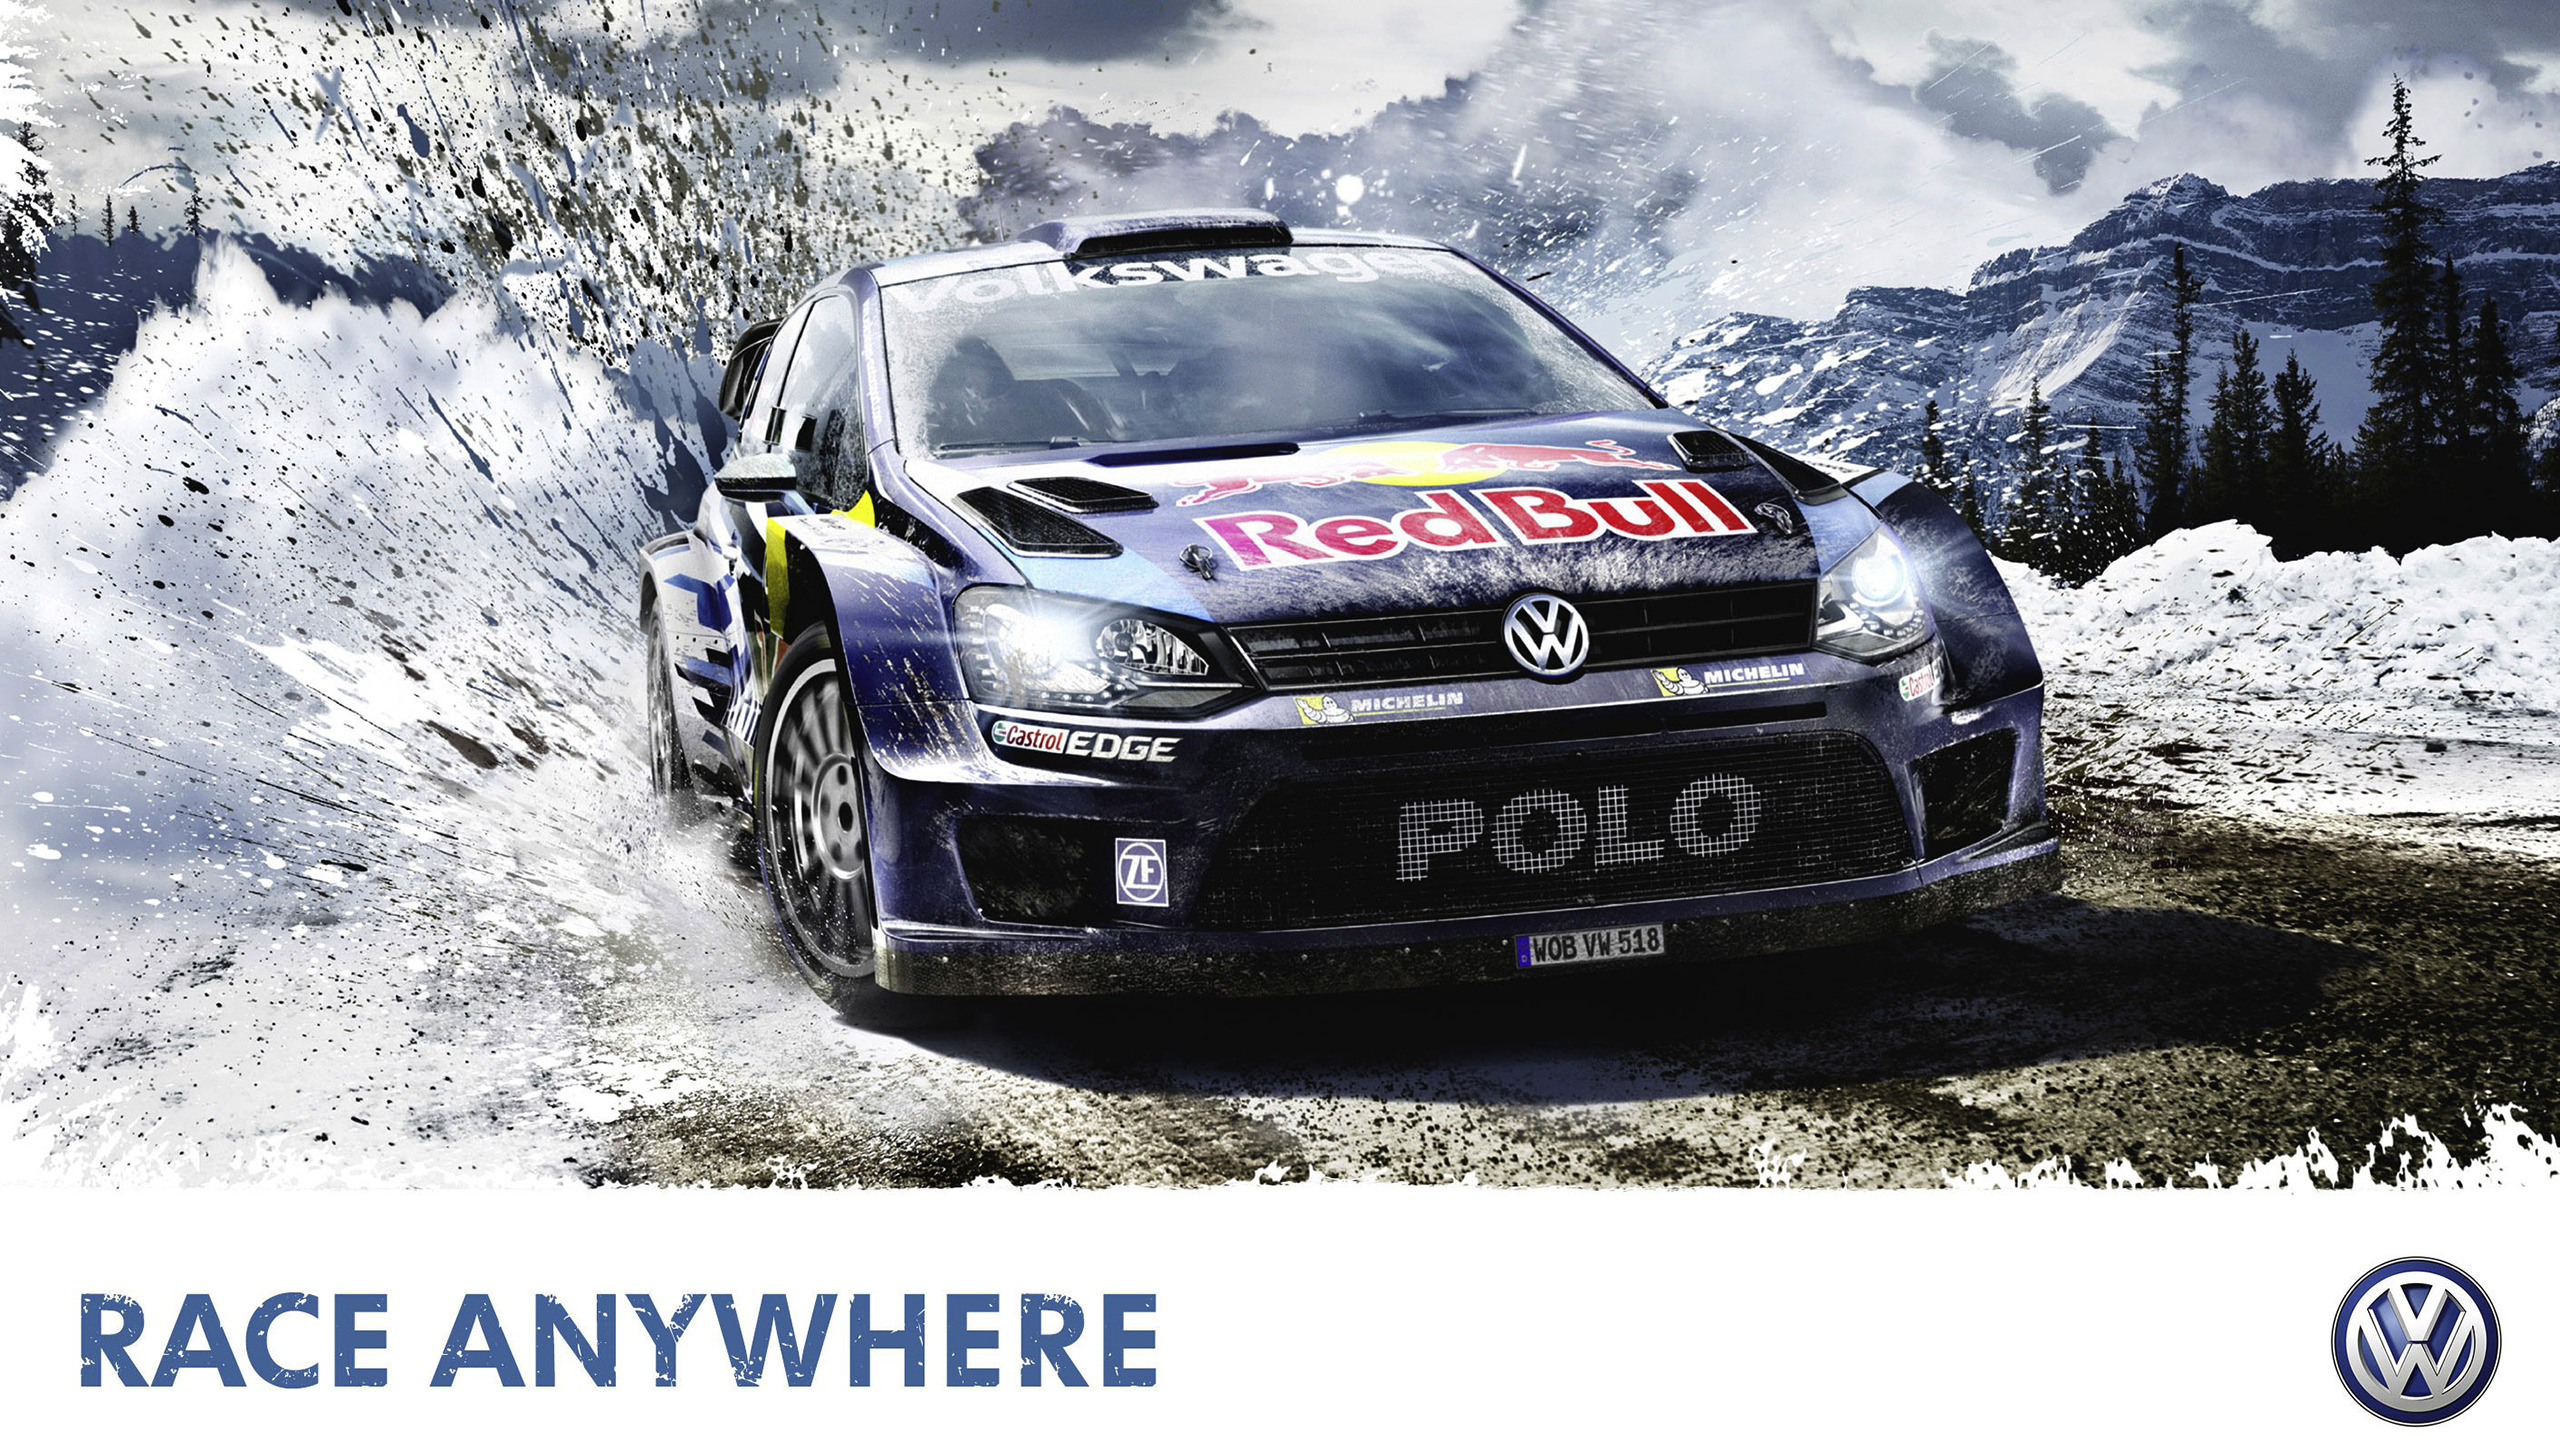 Volkswagen Polo, Rally Cars, Wrc, VW Polo WRC, Snow, Mud, Video Games, IOS, Car, Vehicle, Red Bull Wallpaper